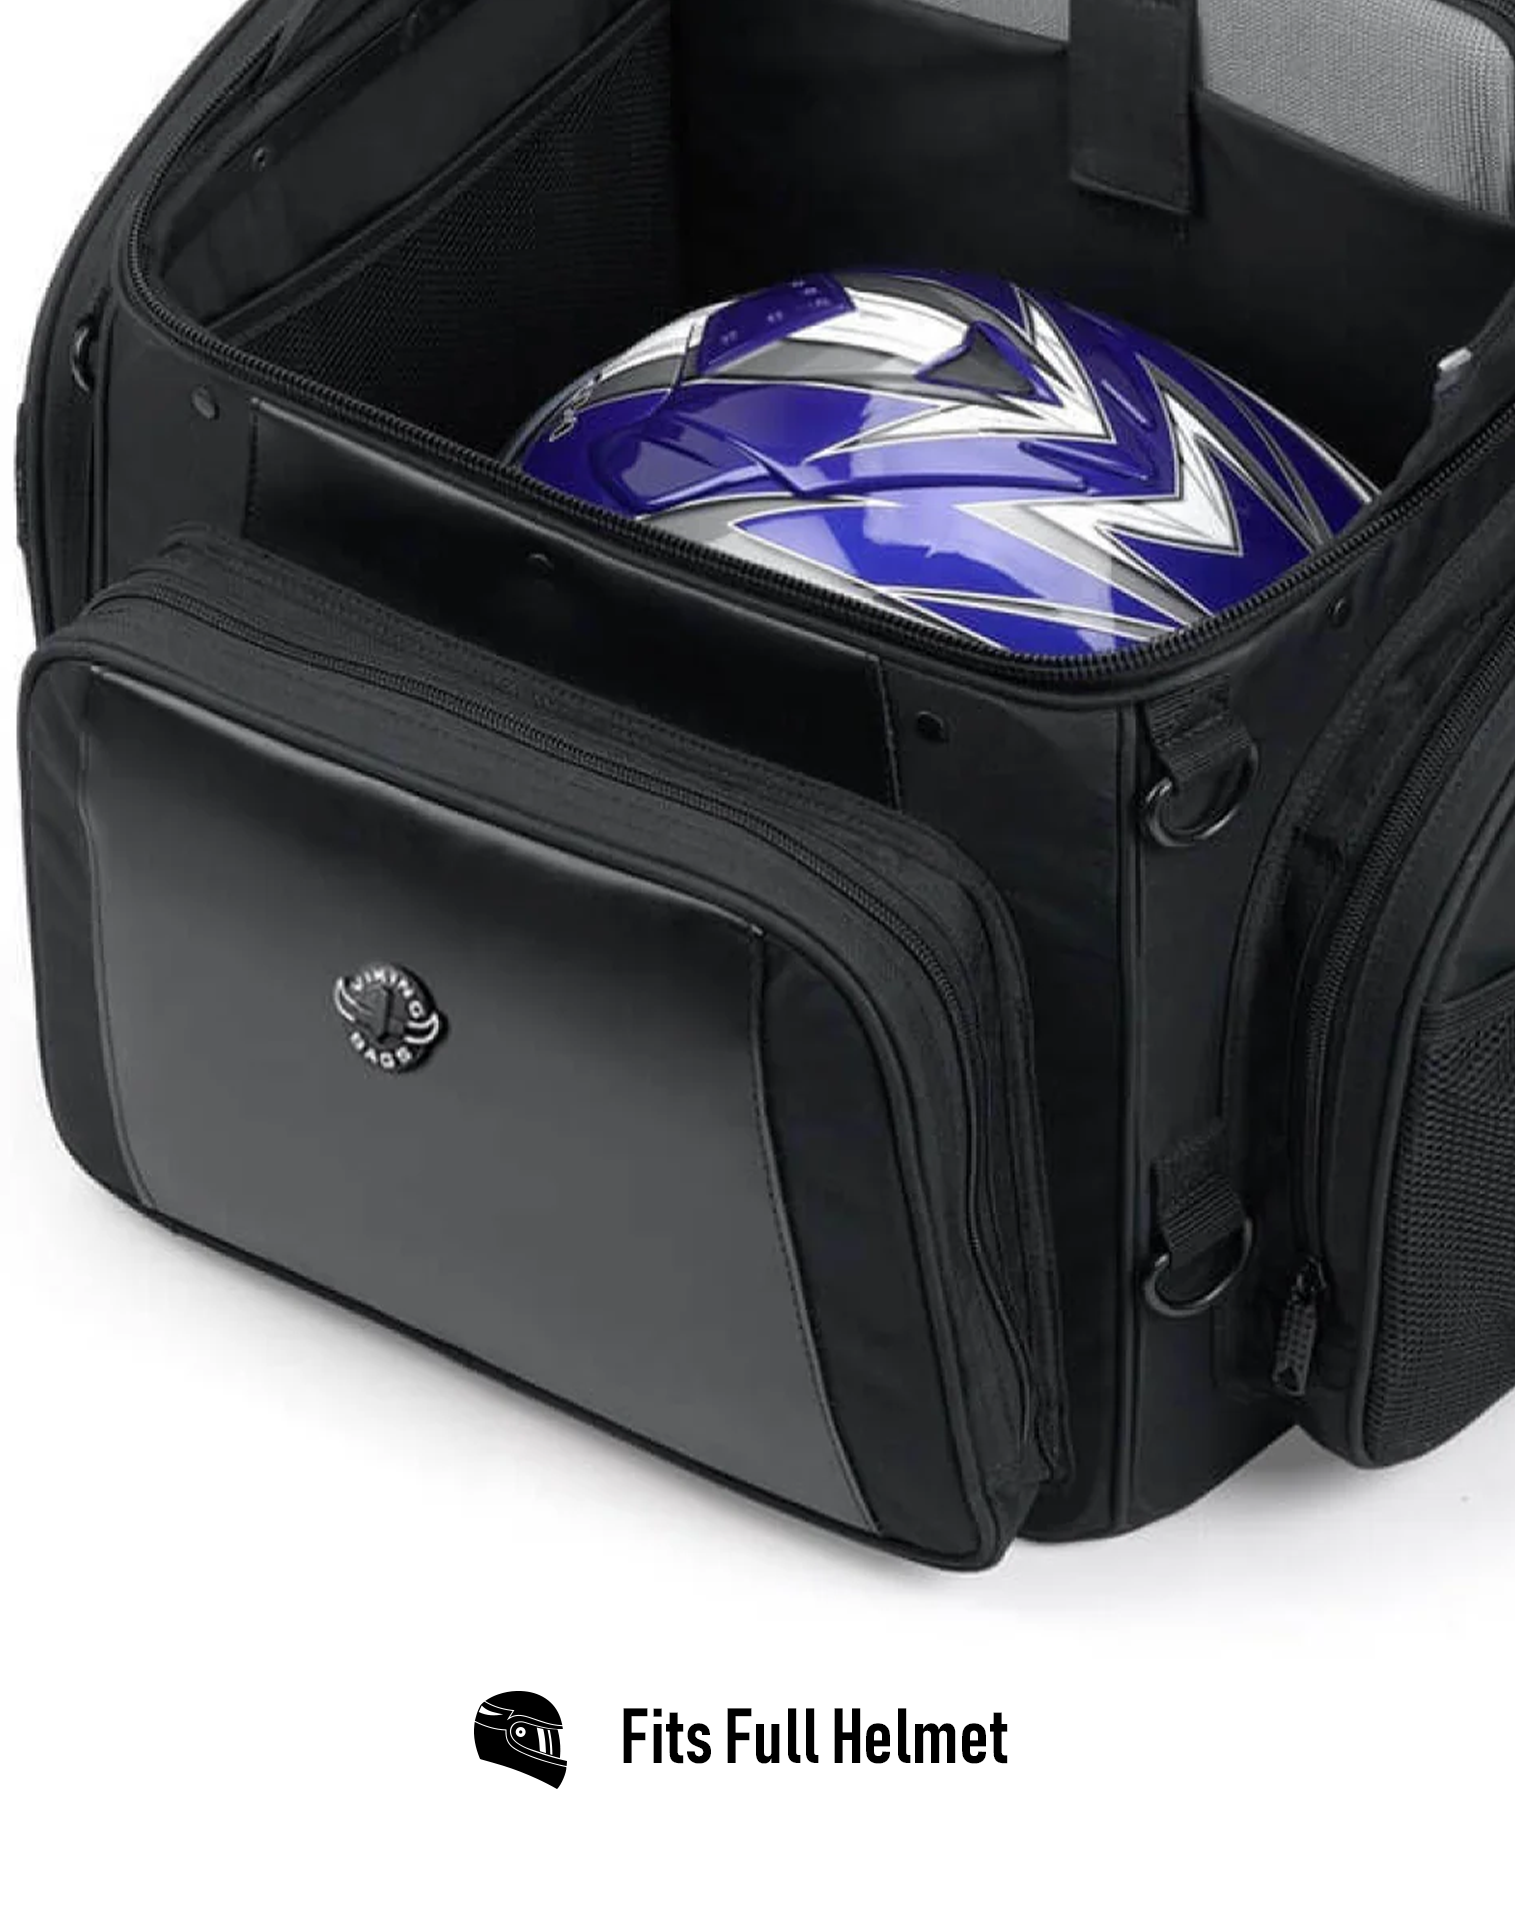 52L - Galleon XL Motorcycle Seat Luggage